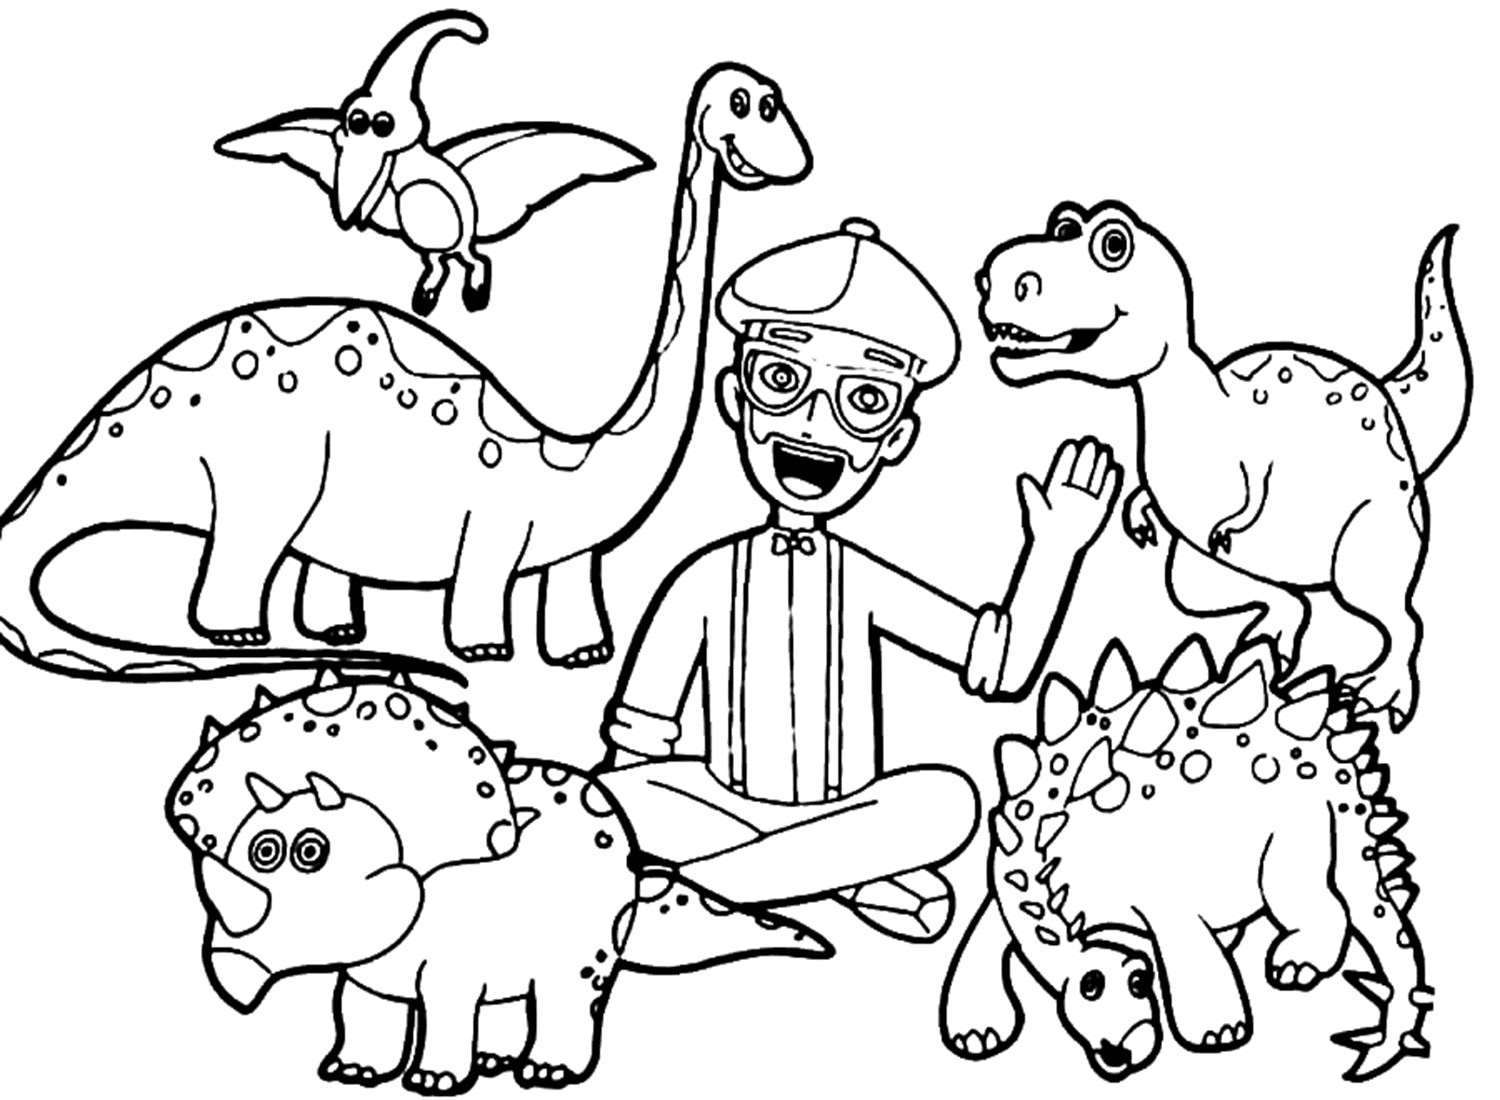 Blippi And Dinosaurs Coloring Page from Blippi